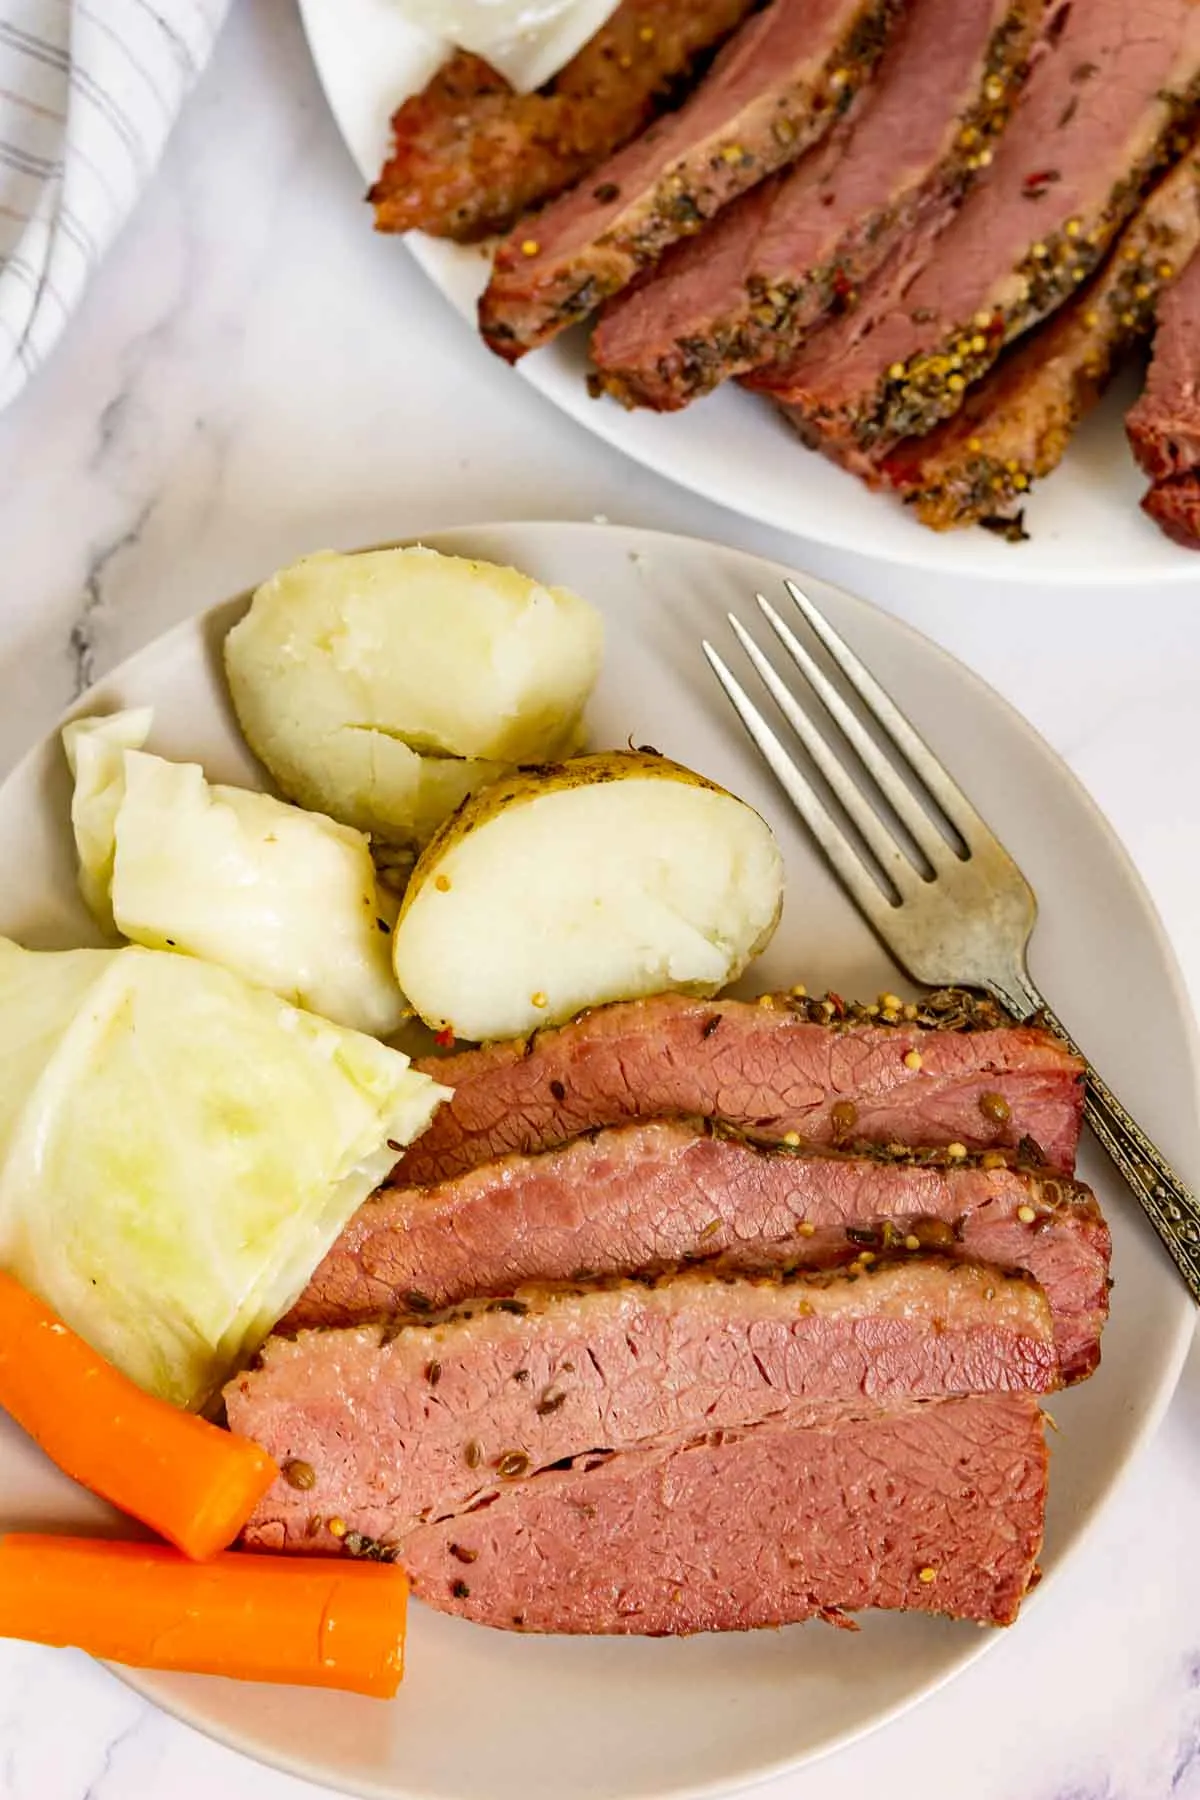 Corned beef dinner on a plate with potatoes, cabbage, and carrots.